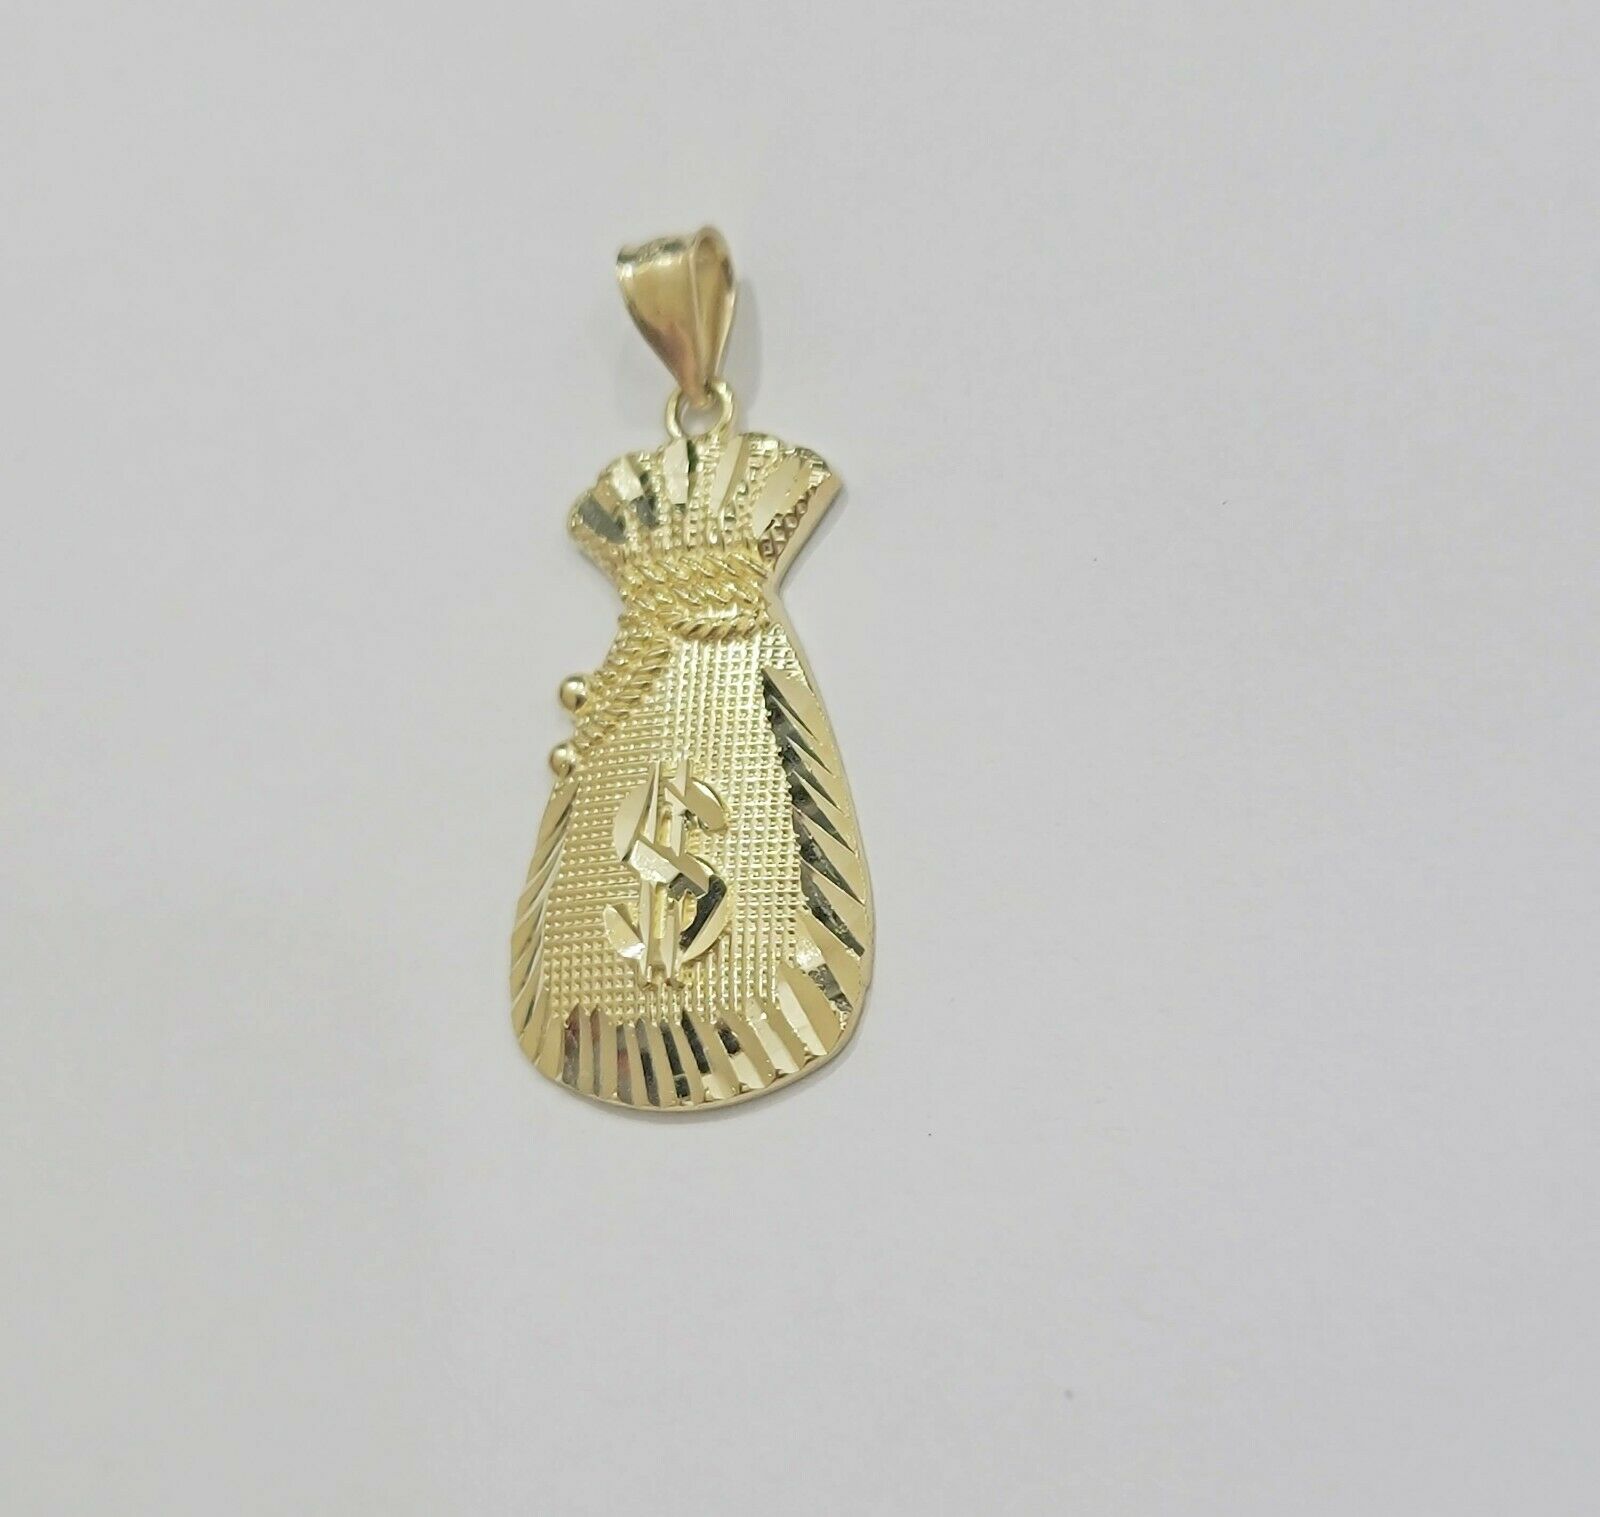 REAL 10k Gold Rope Chain Charm Pendant  SET 3mm Necklace 18-28" Money Dollar Bag